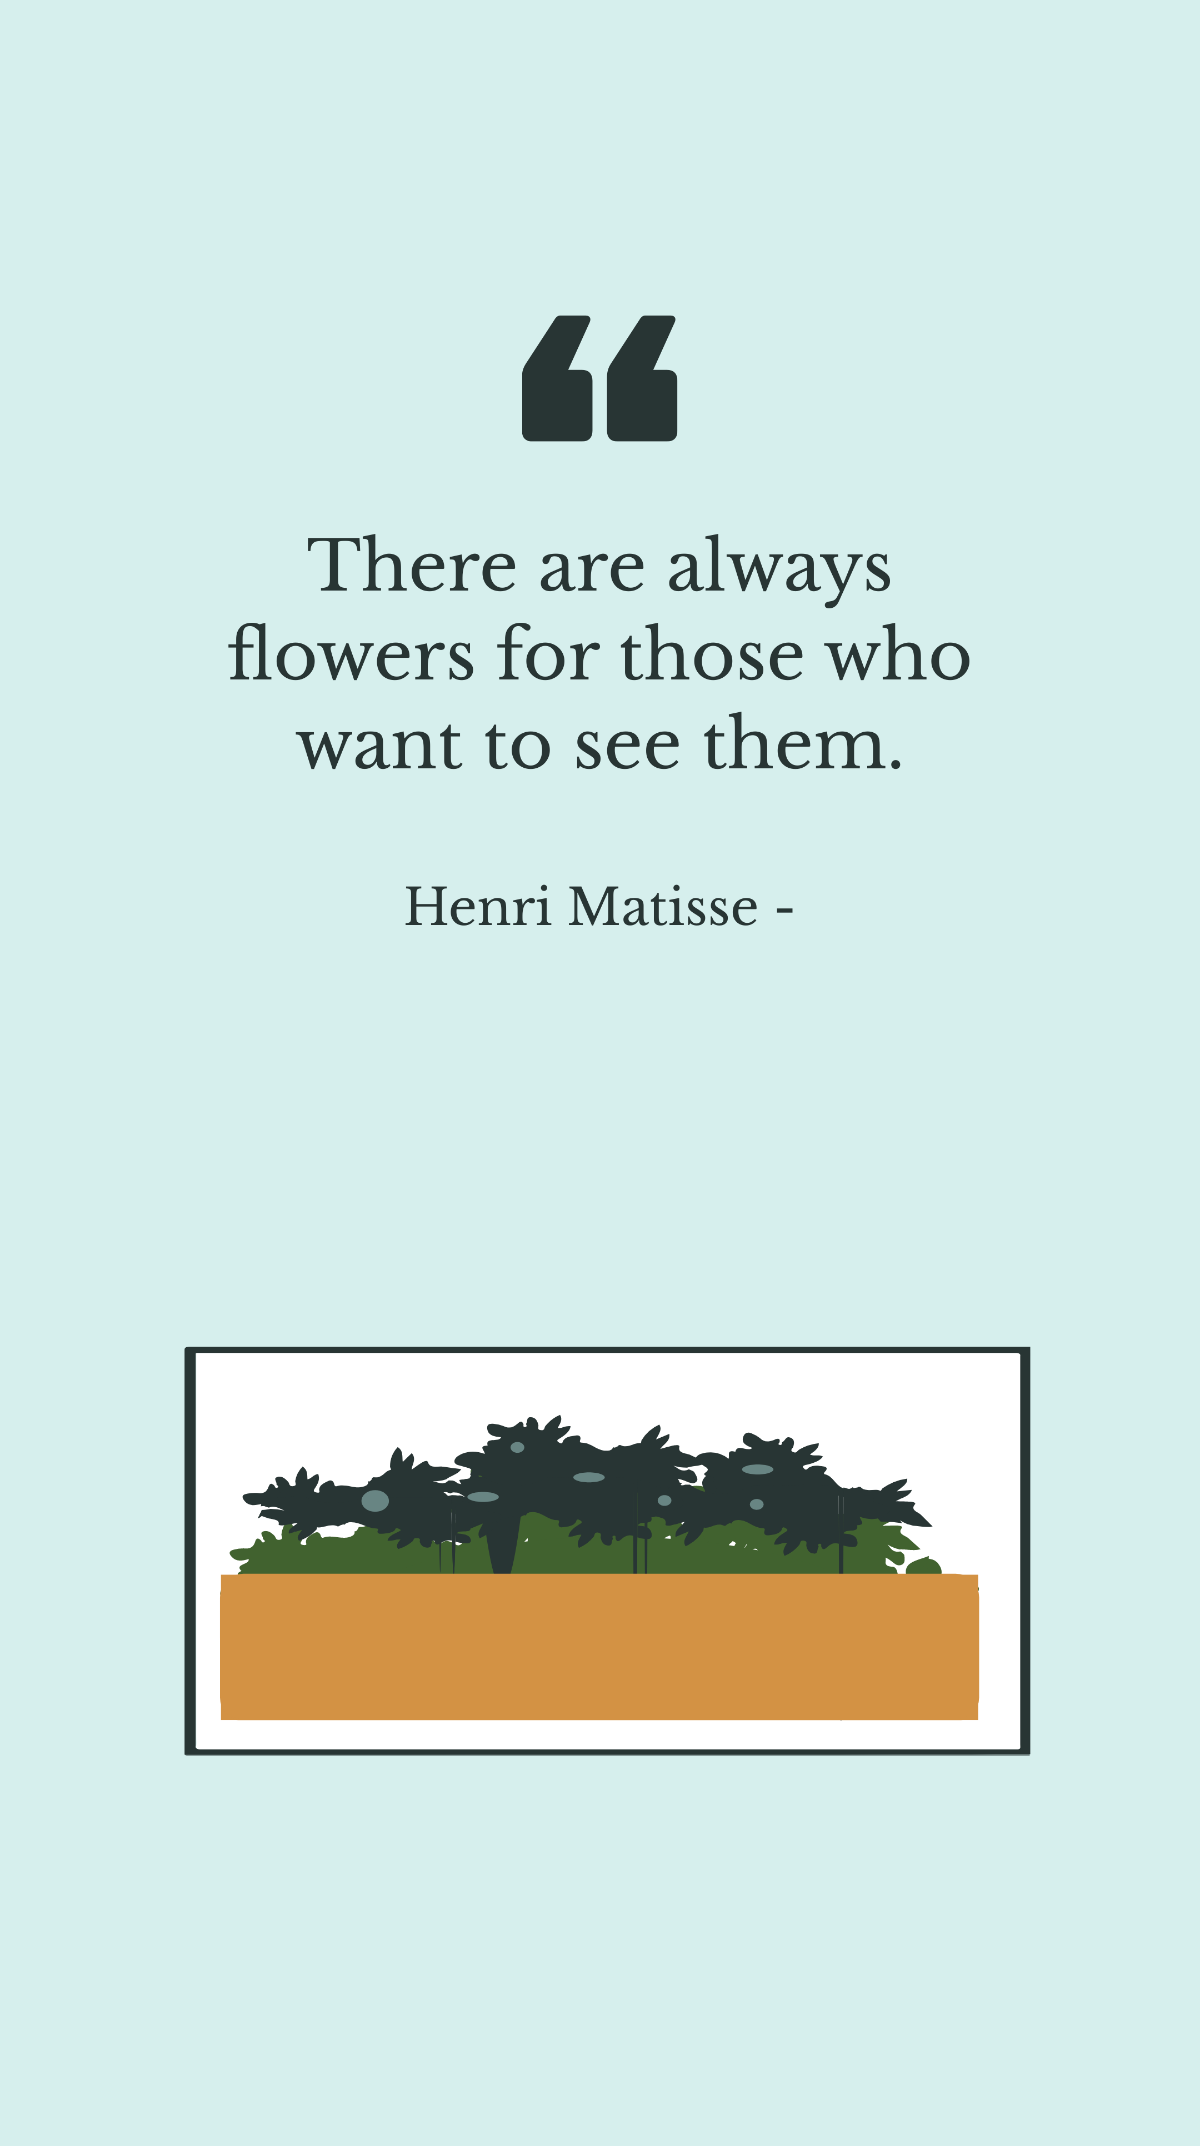 Henri Matisse - There are always flowers for those who want to see them. Template